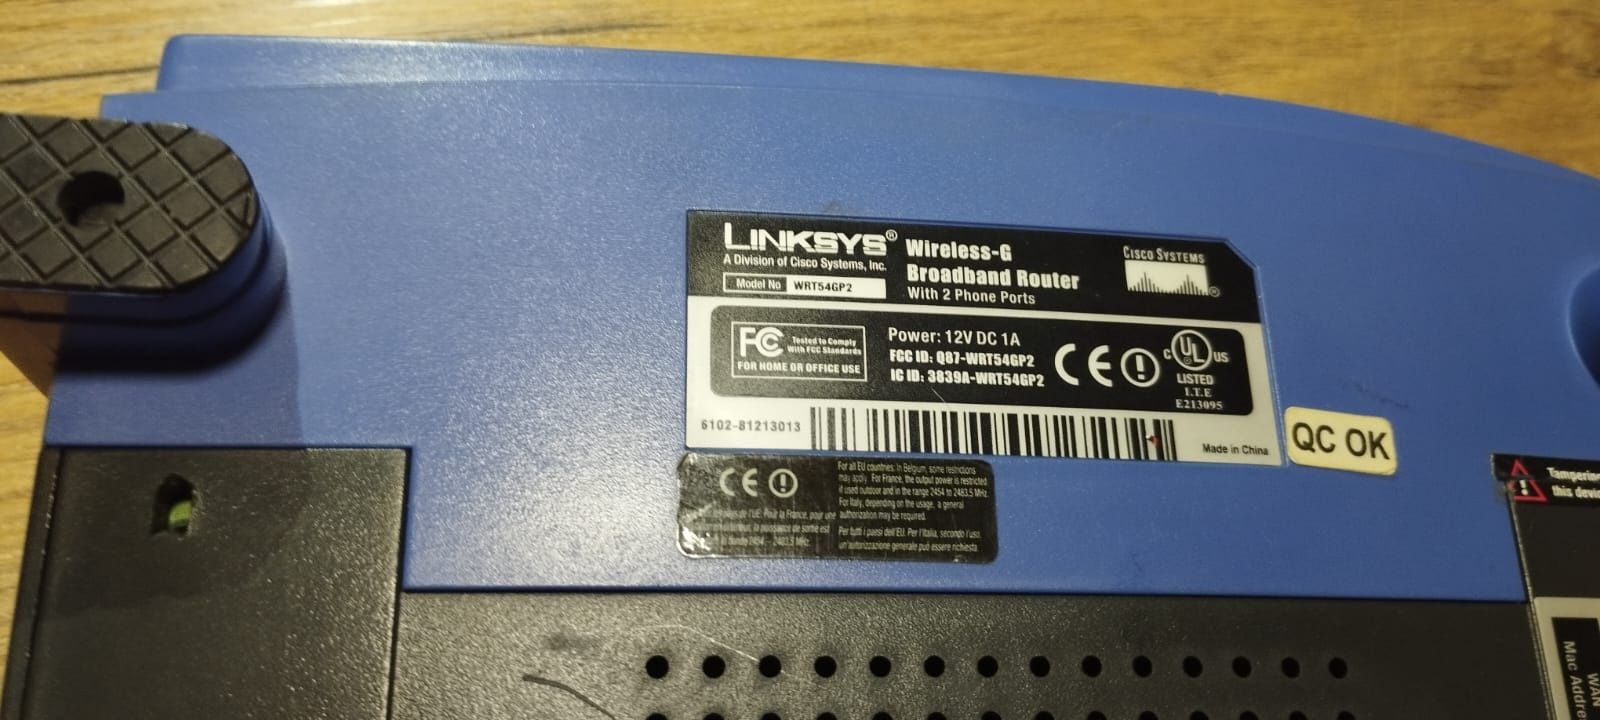 Linksys WRT54GP2 Router 2 Portsmouth Phone